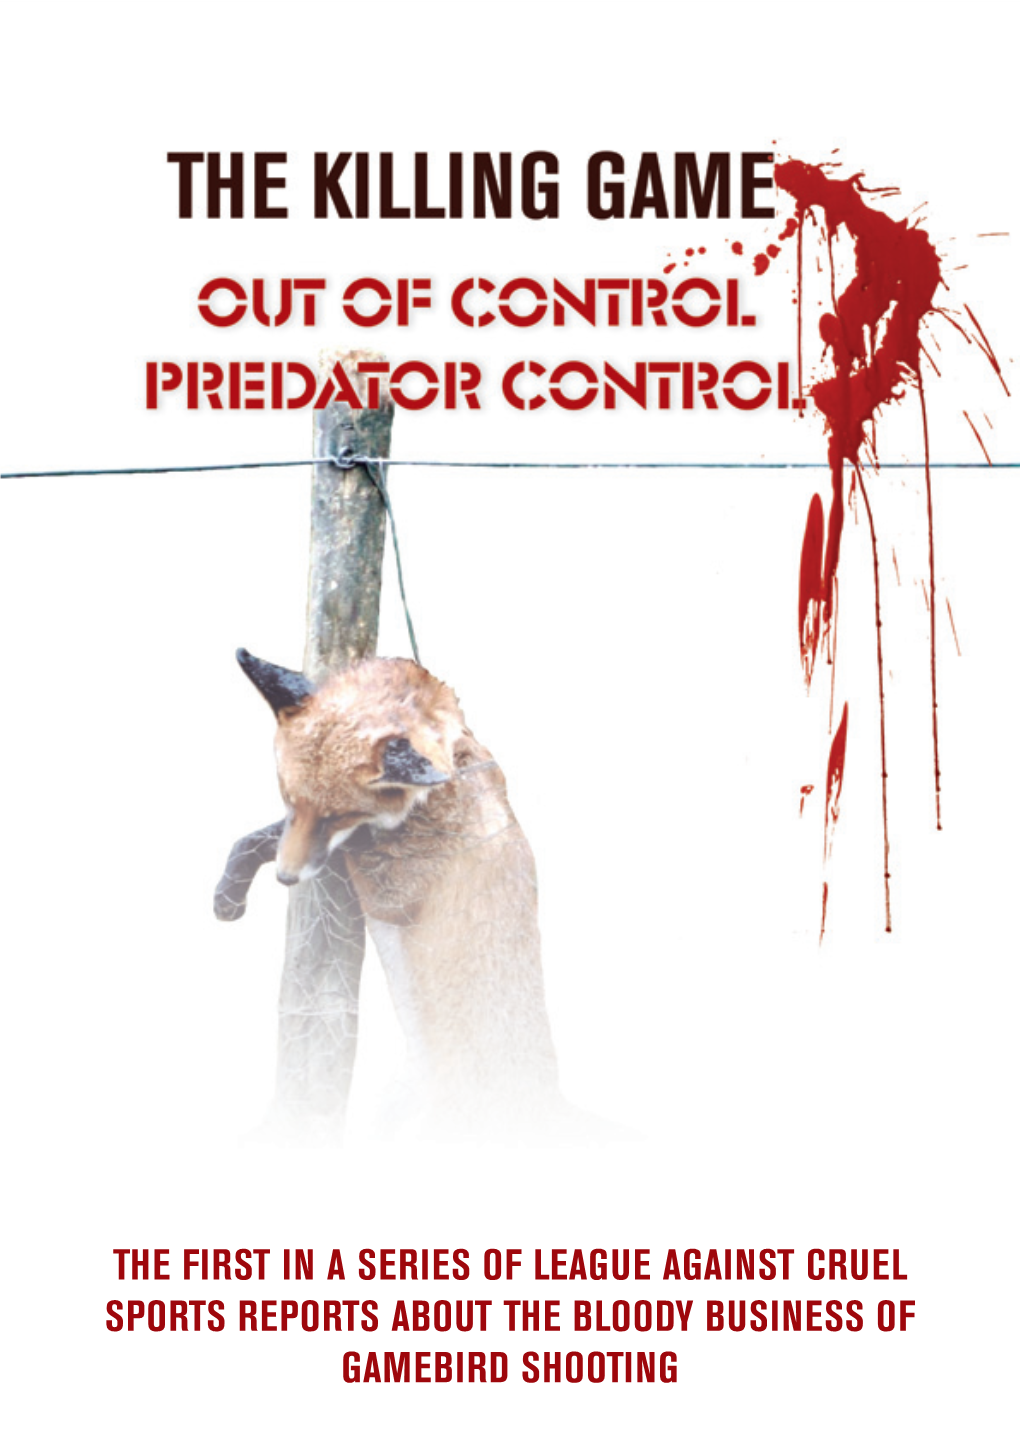 The First in a Series of League Against Cruel Sports Reports About the Bloody Business of Gamebird Shooting out of Control Predator Control